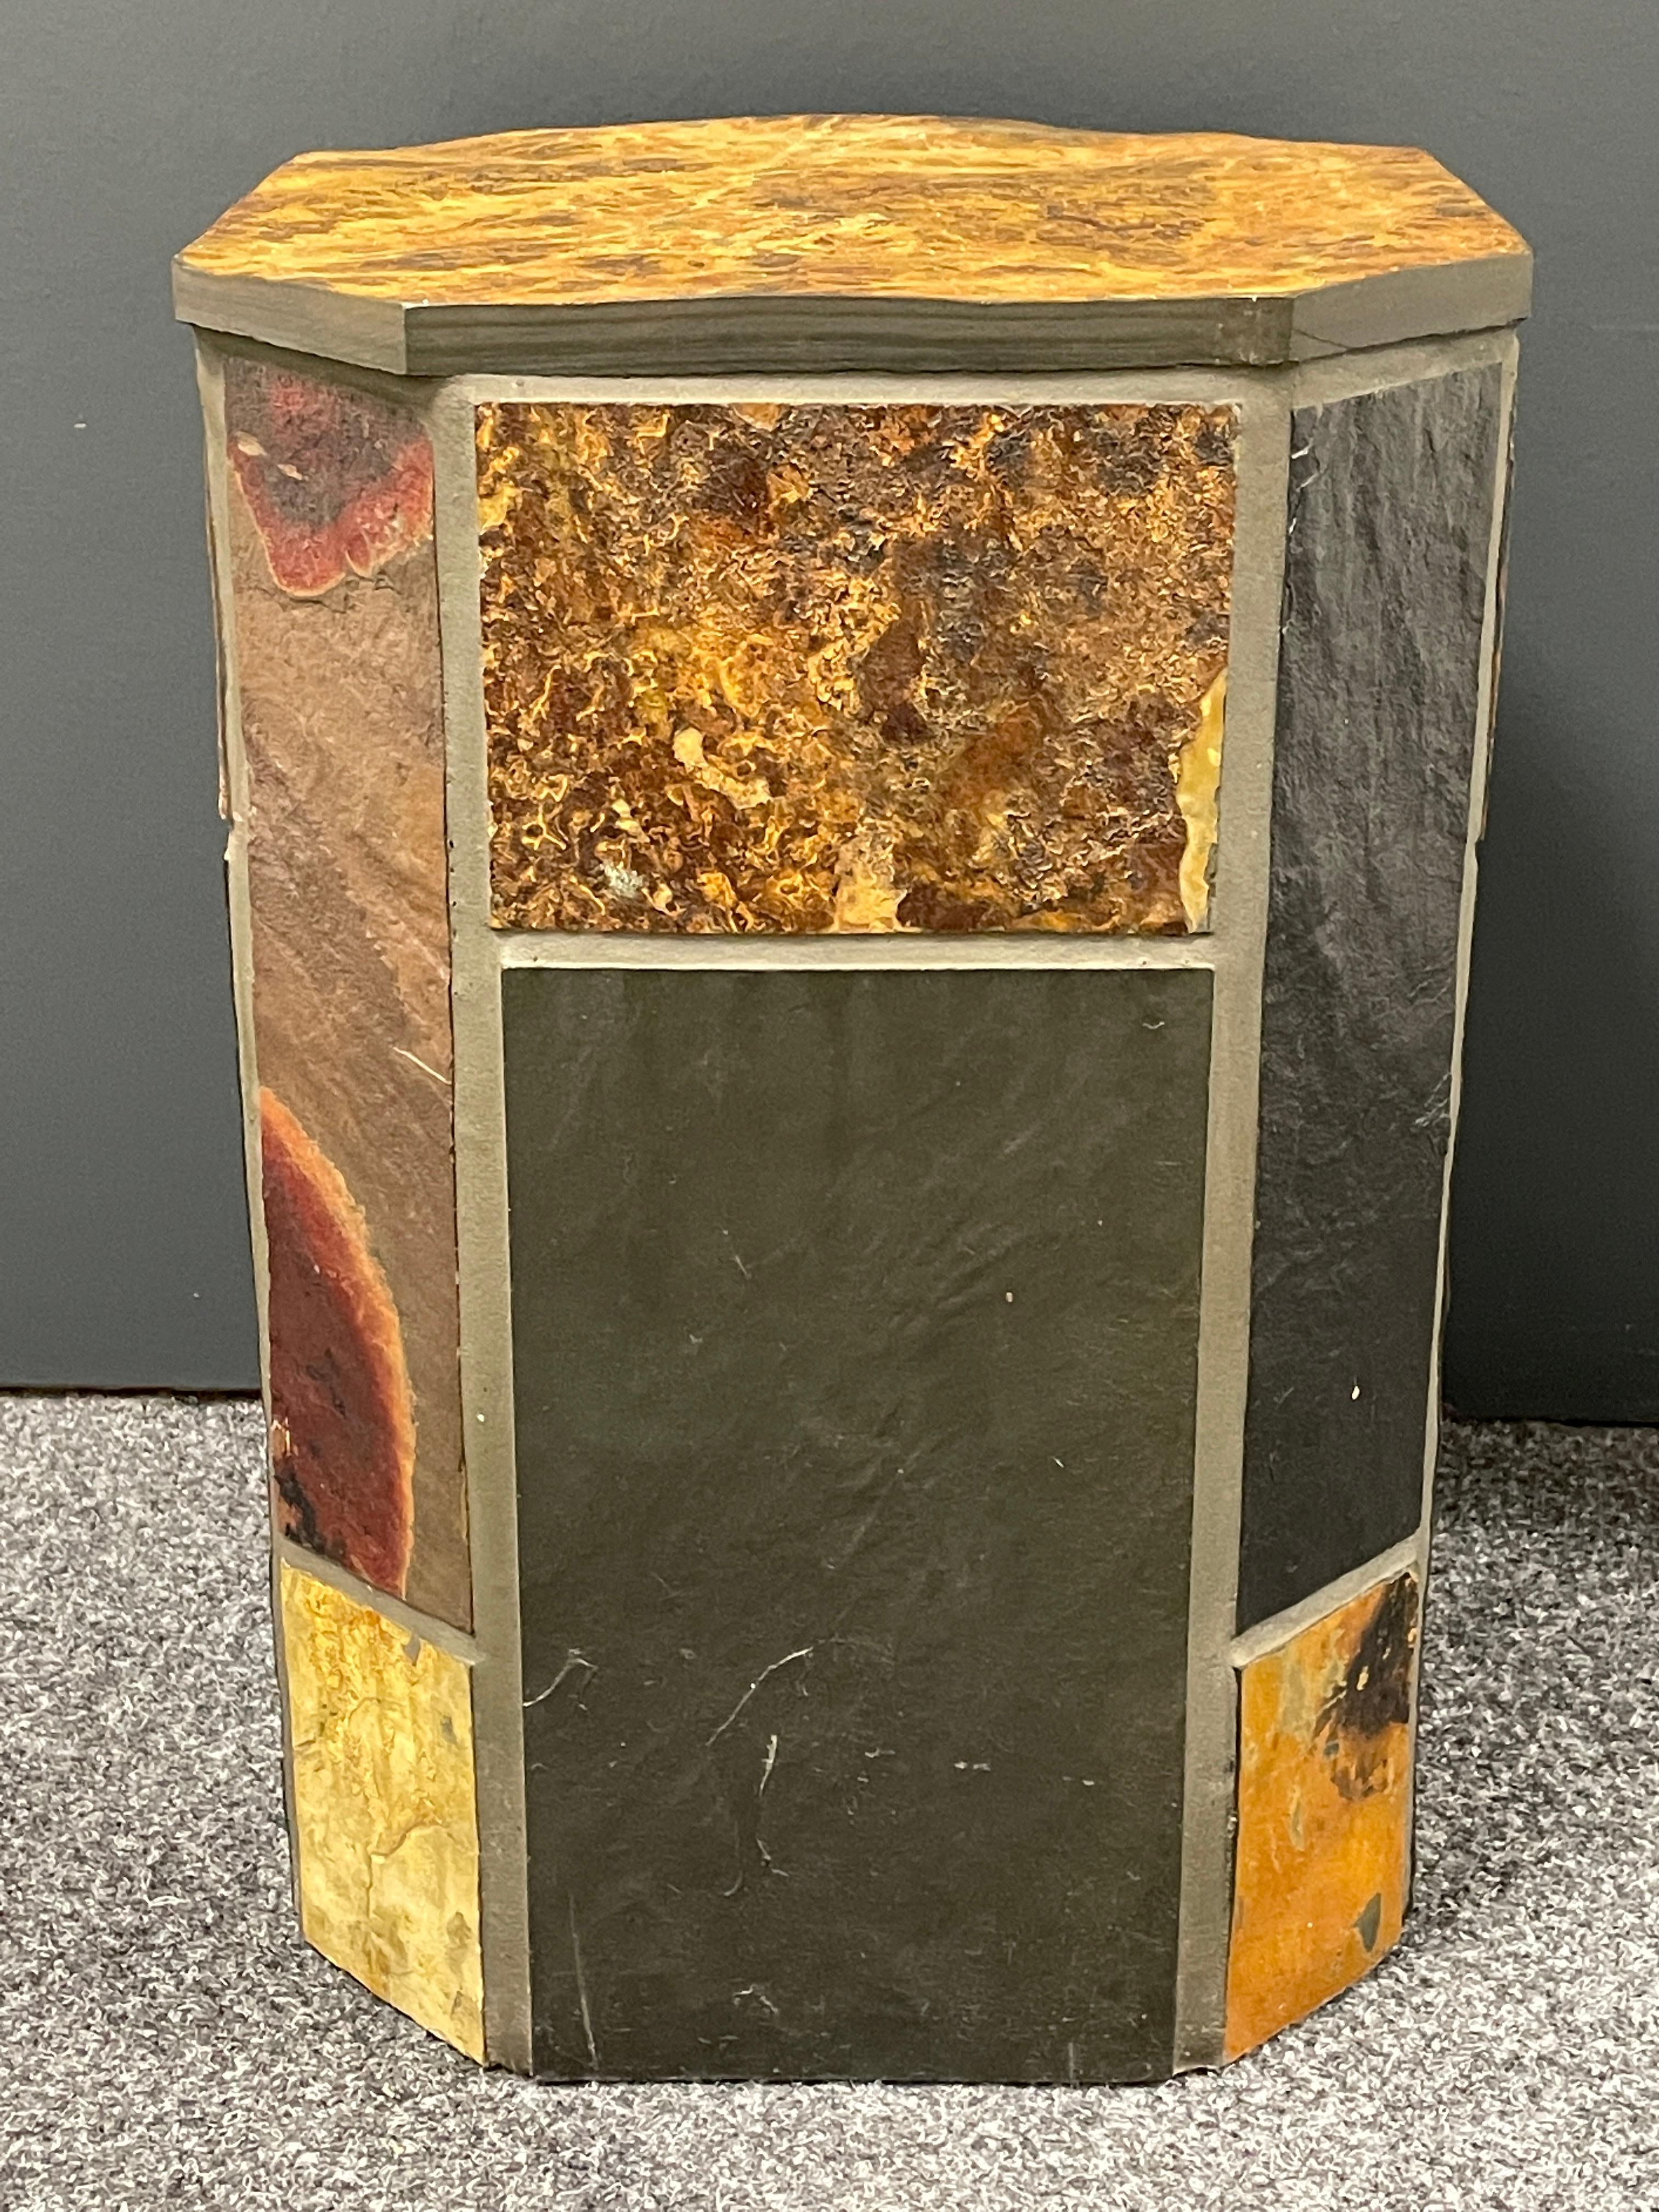 Heavy Brutalist Style Pedestal, Slate, Wood and Concrete, 1960s Dutch In Good Condition For Sale In Nuernberg, DE